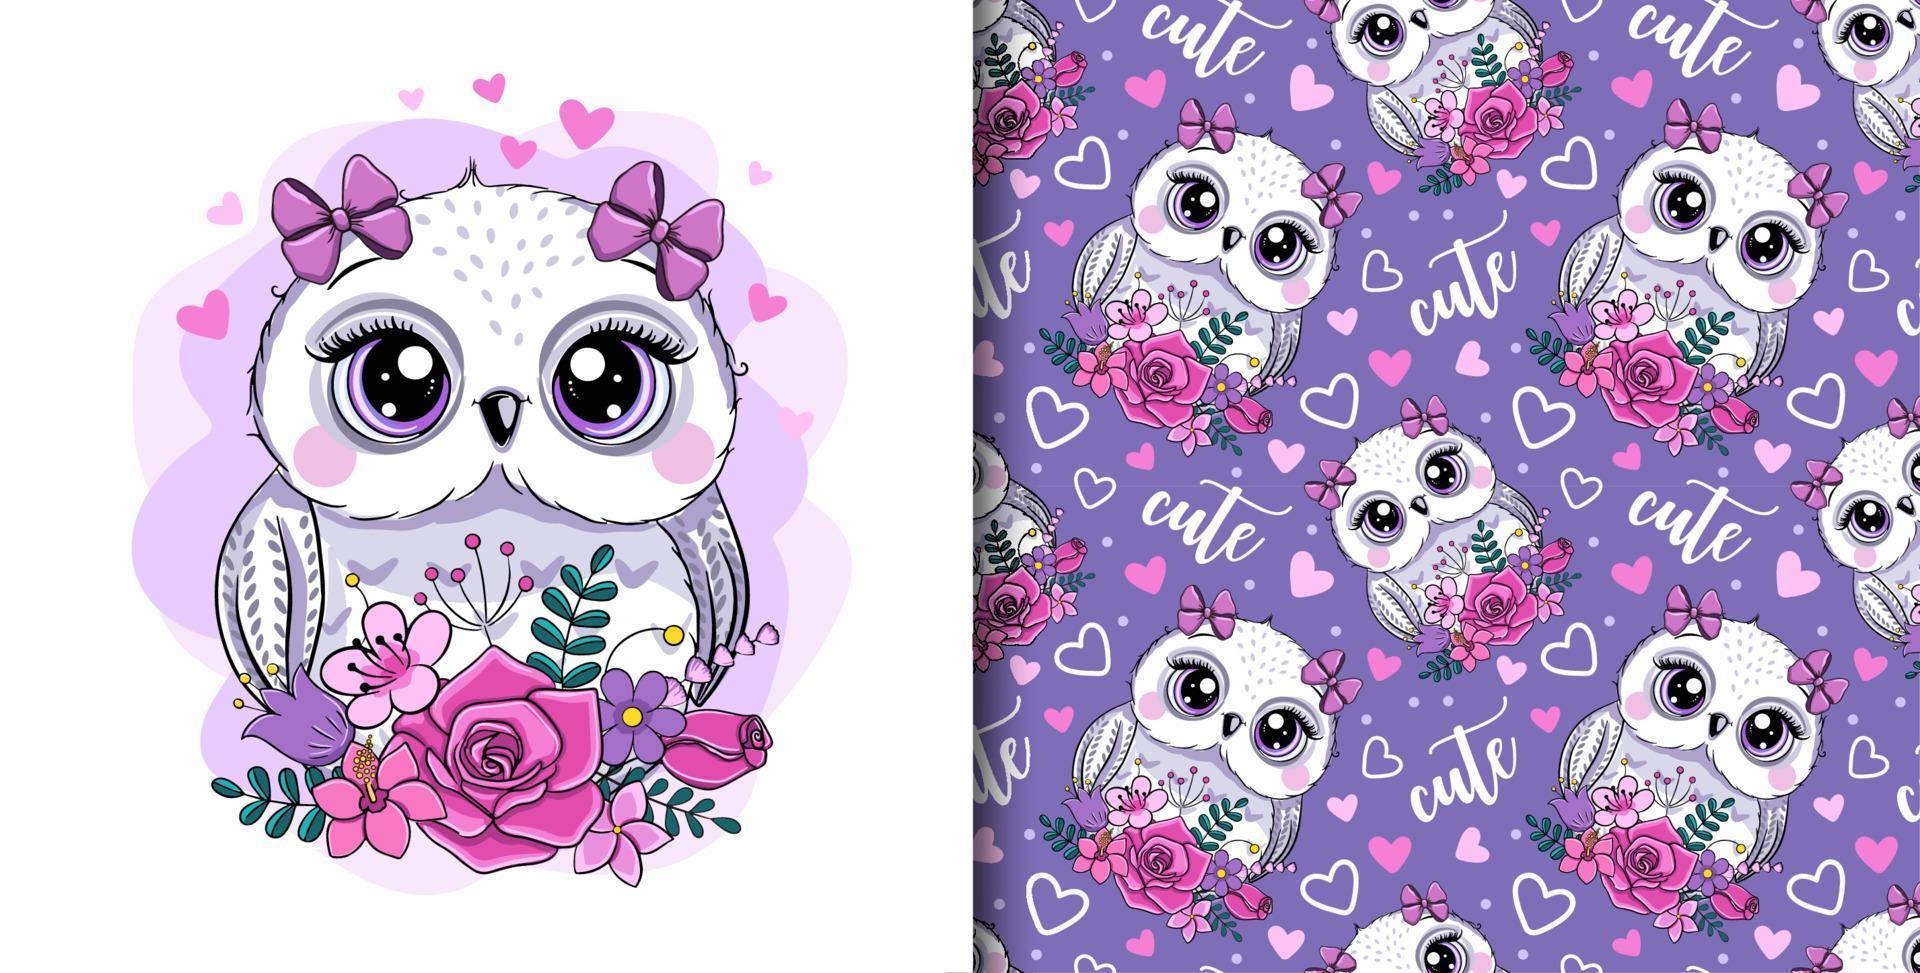 Llittle cute owl and flowers. Seamless pattern. Greeting Birthday Card or children's clothing design. vector